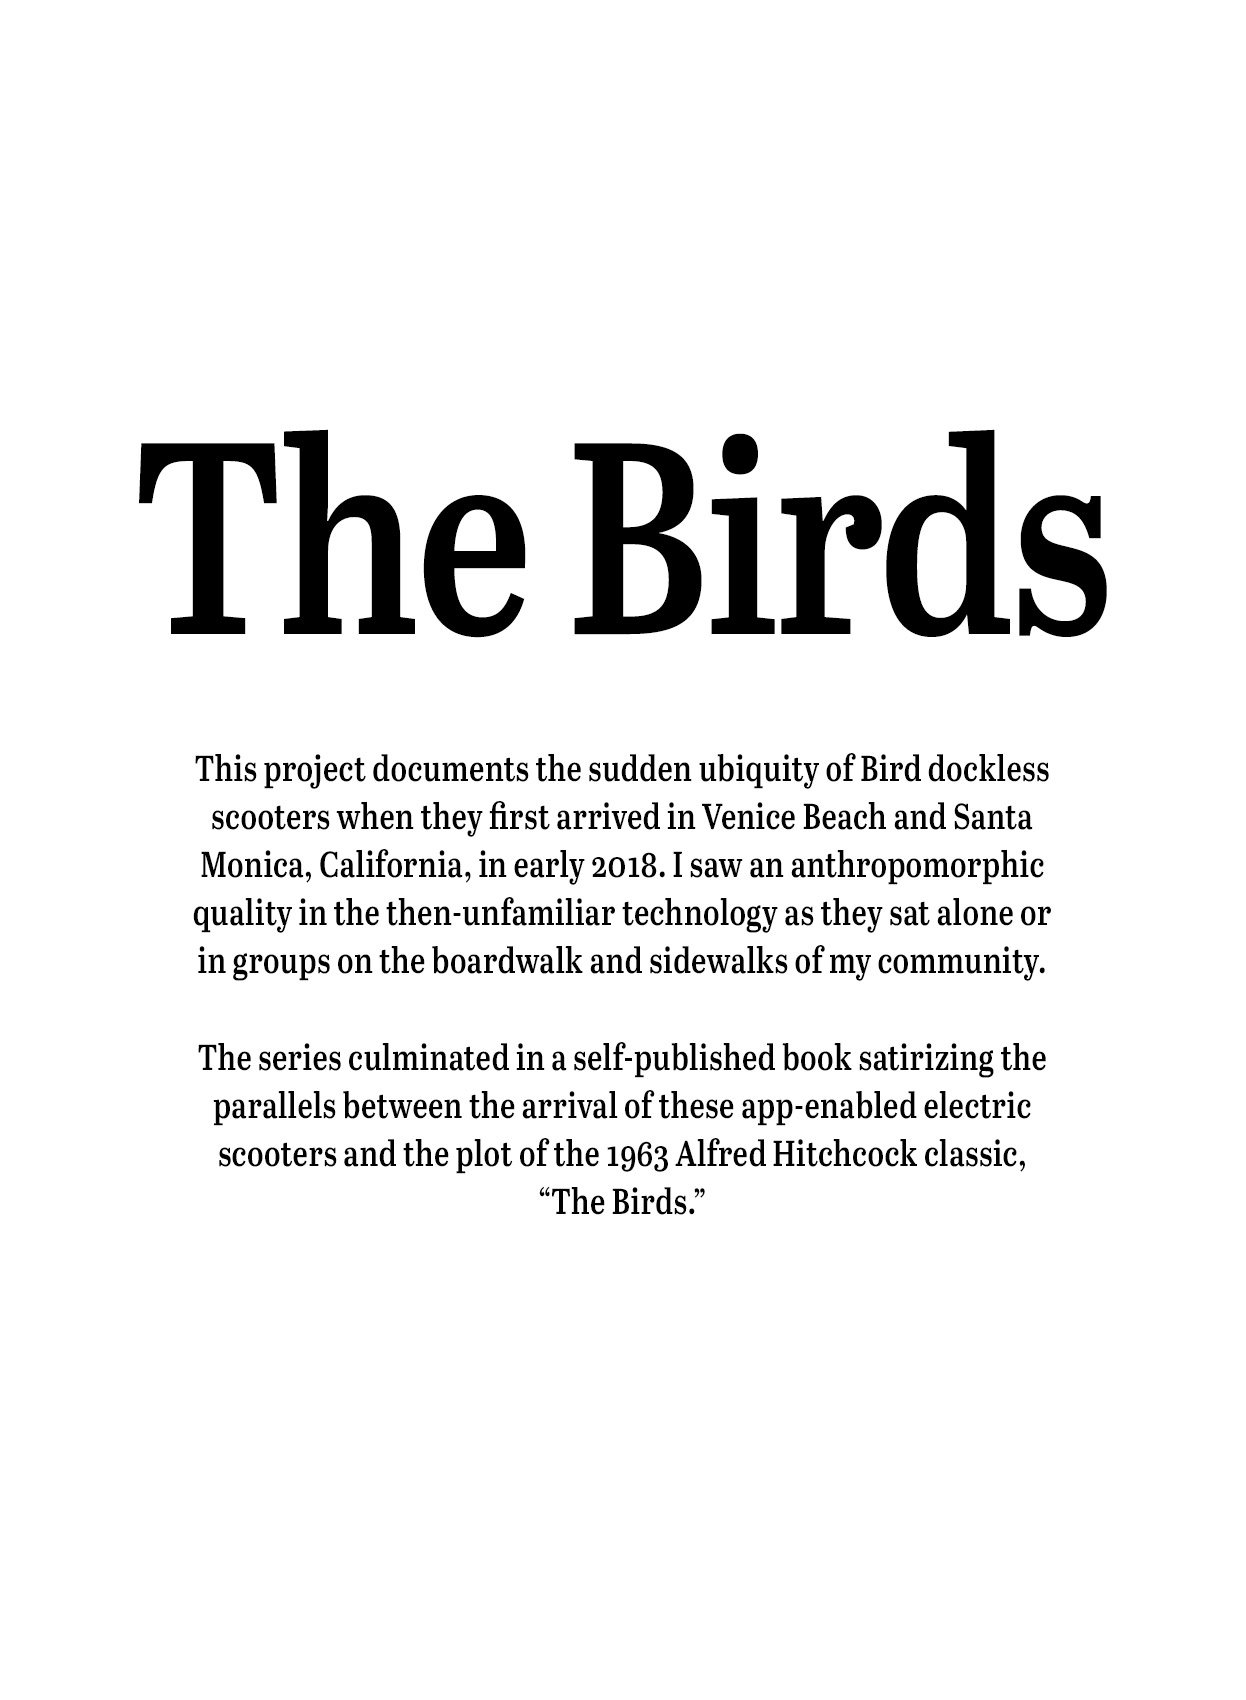 Cover page for Birds book shot in Venice and Santa Monica.